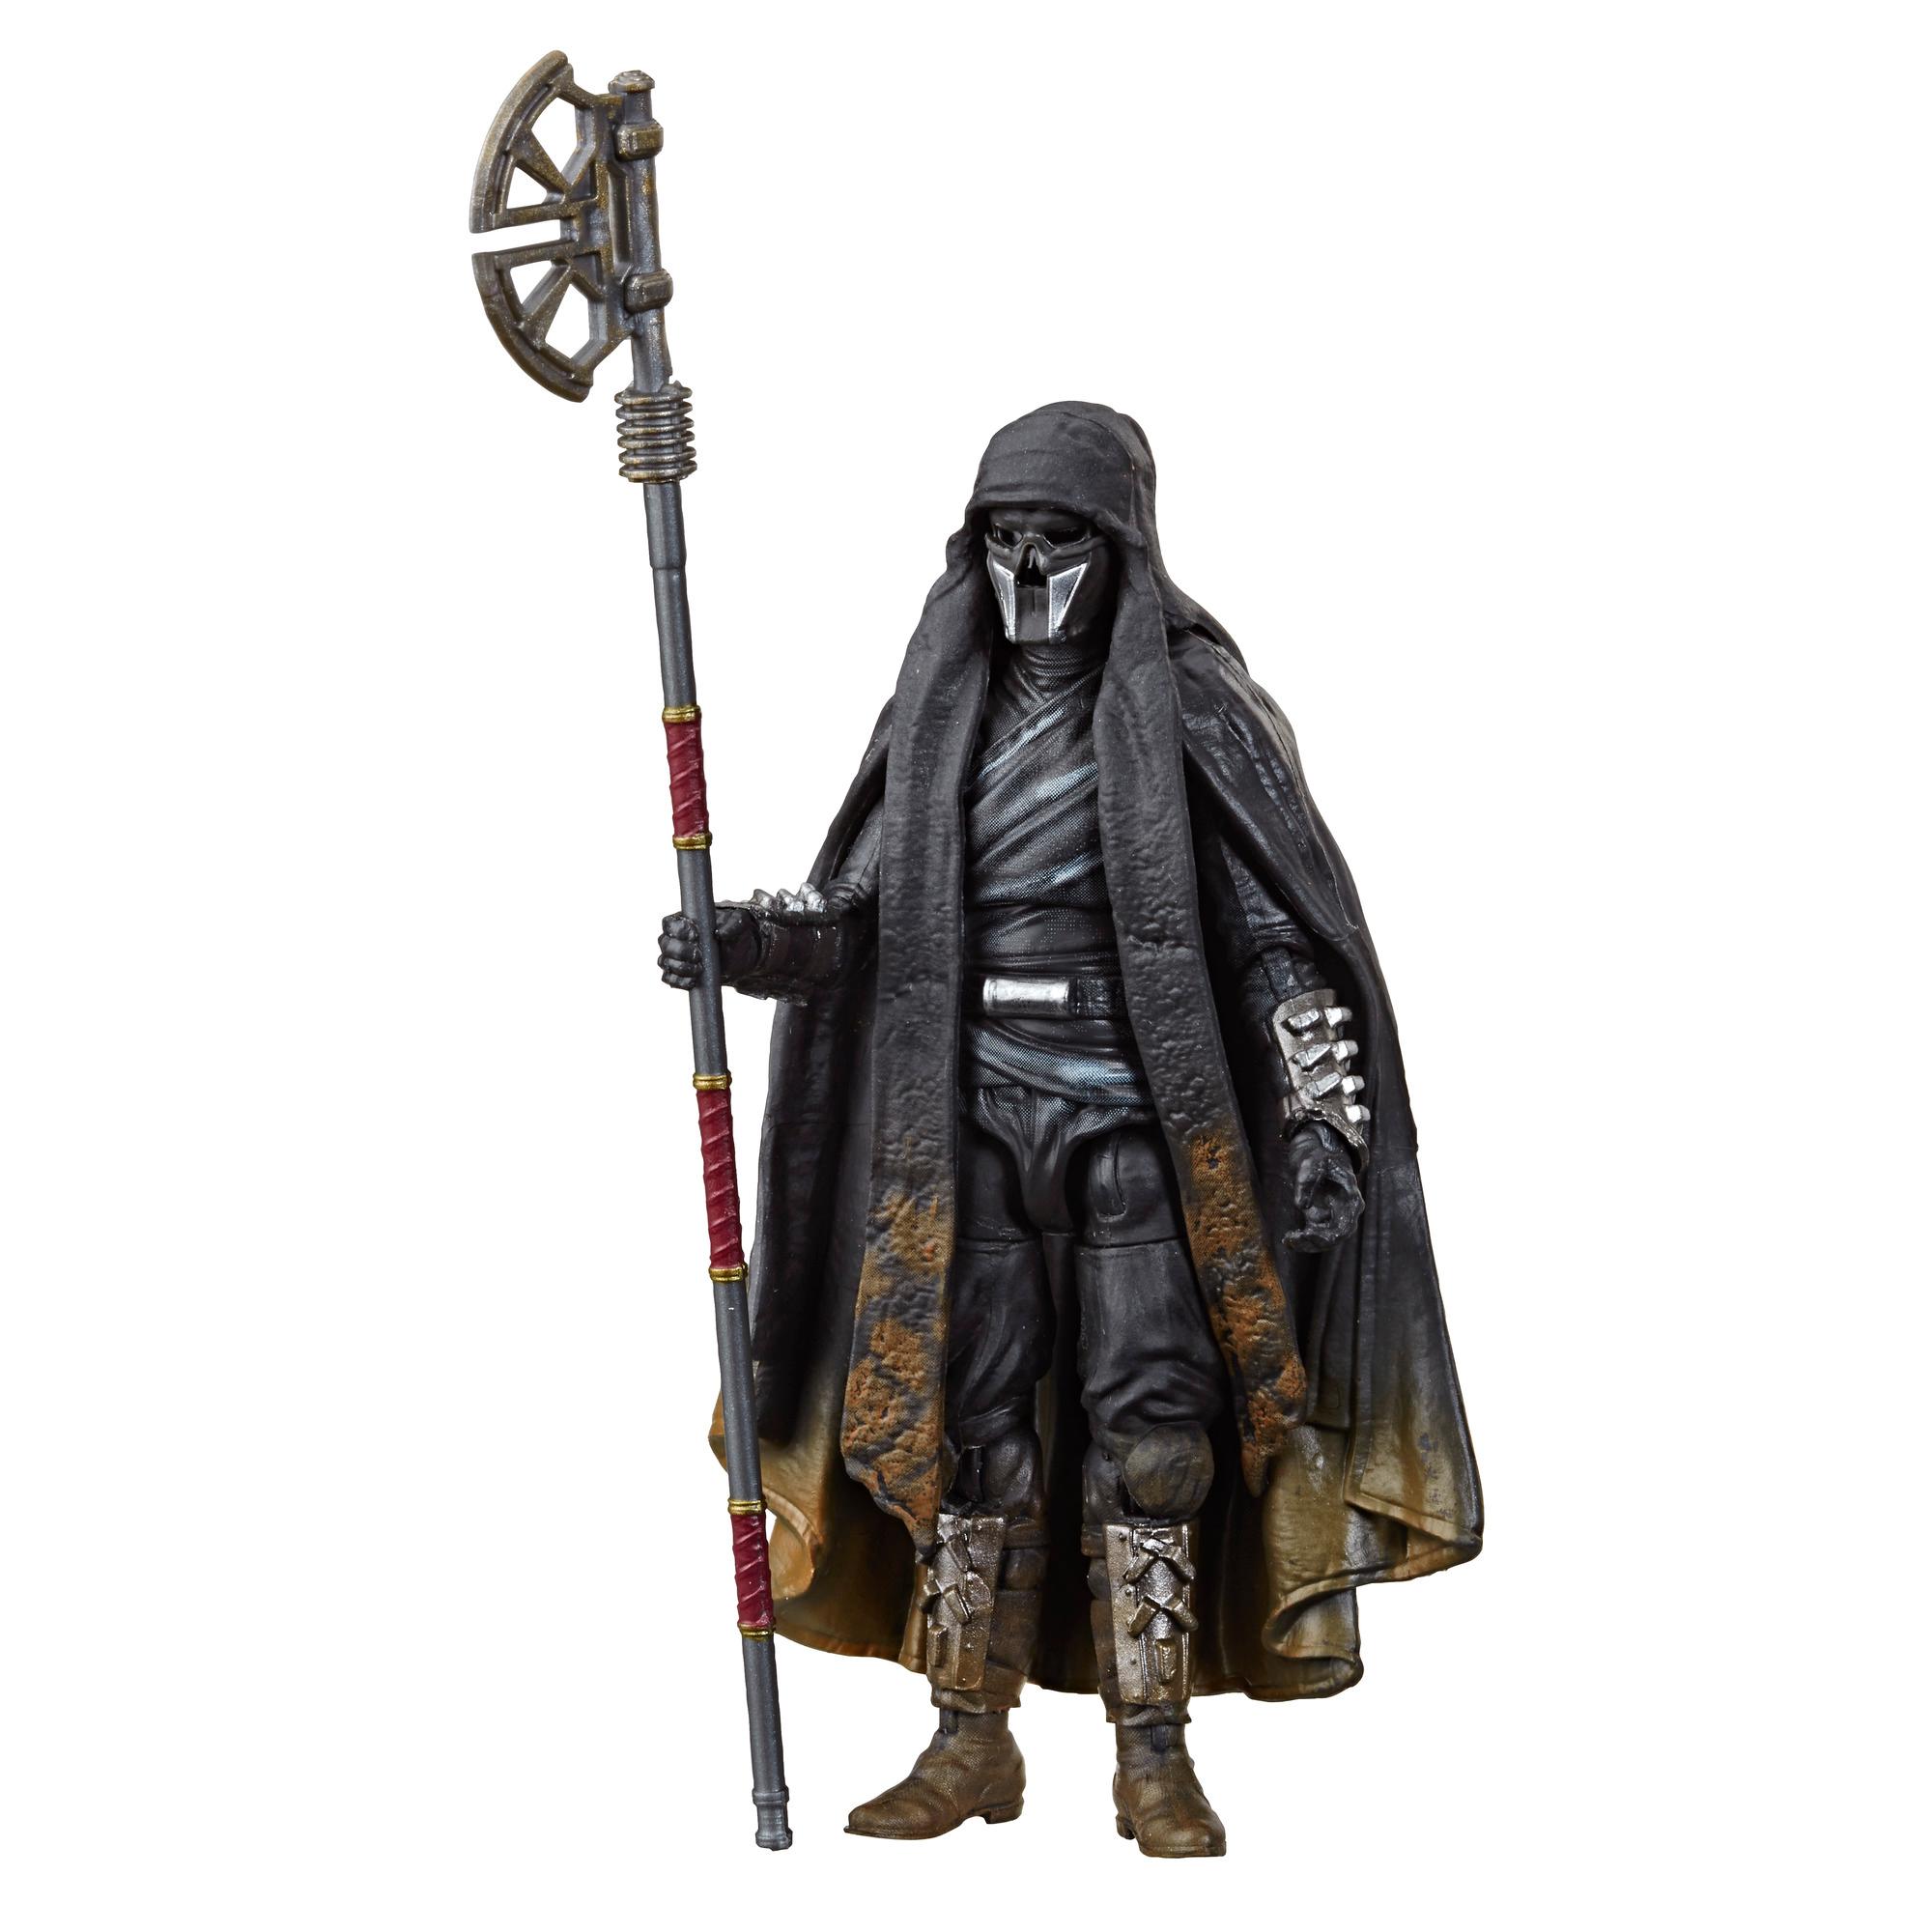 Star Wars The Vintage Collection Star Wars: The Rise of Skywalker Knight of Ren (Long Axe) Toy, 3.75-inch Scale Figure